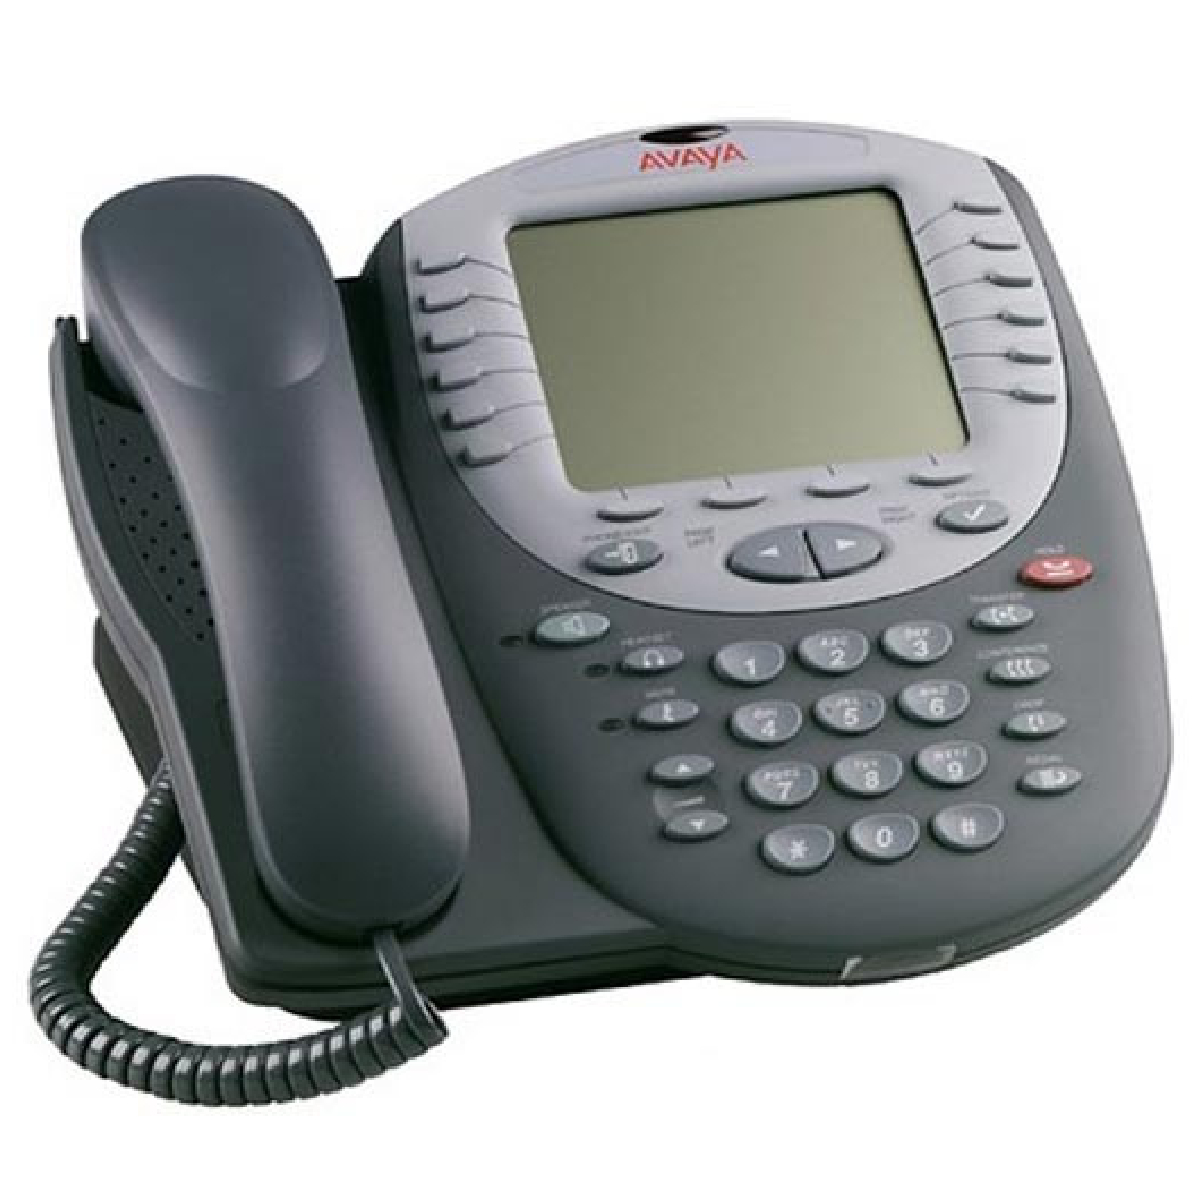 Avaya 4621SW IP Phone with Switch and Backlit Display - 700345192 - 700381544